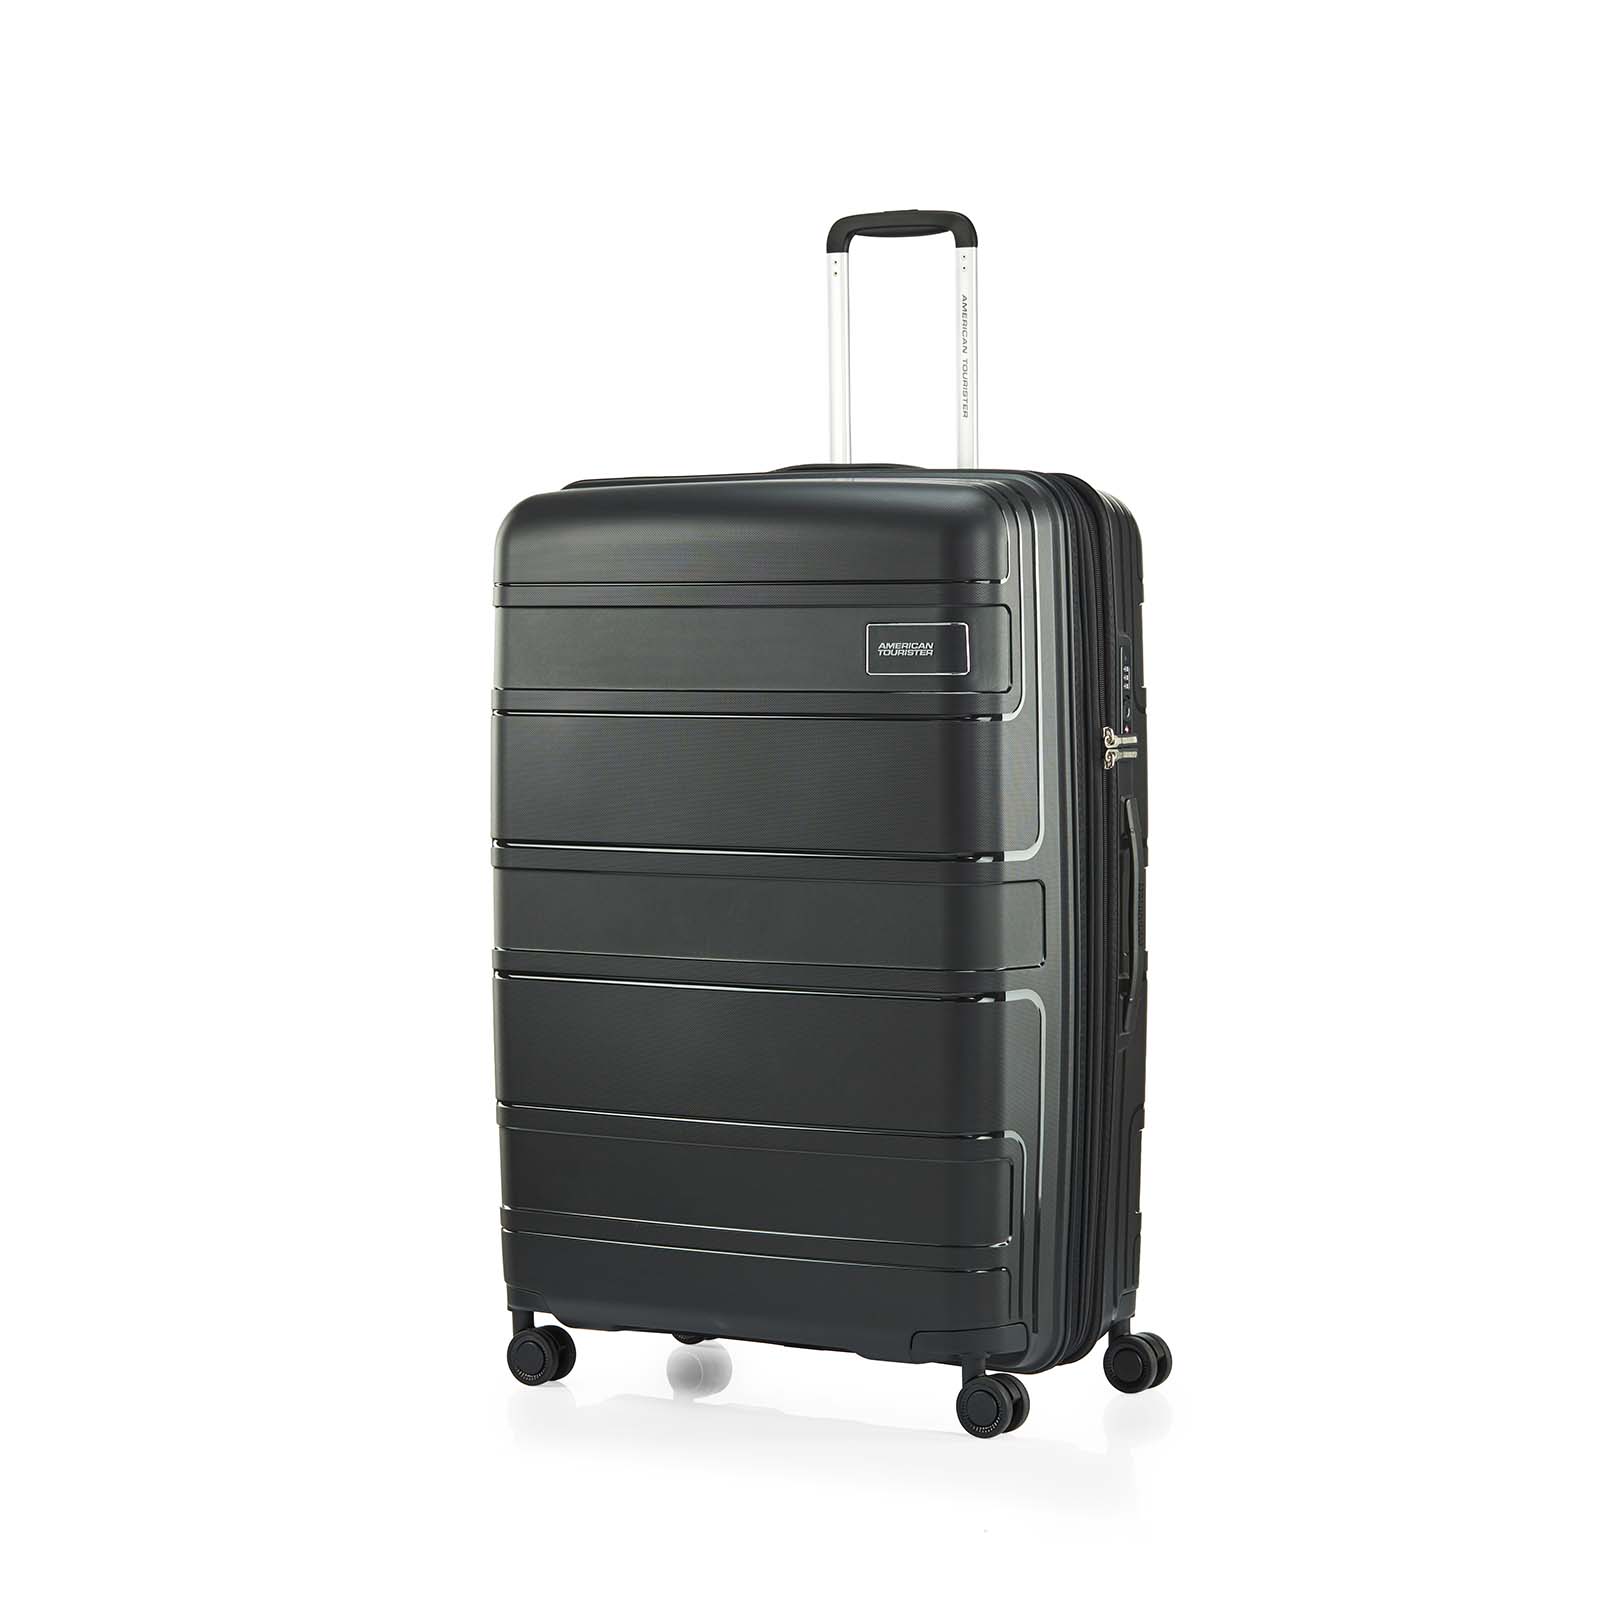 American-Tourister-Light-Max-82cm-Suitcase-Black-Front-Angle